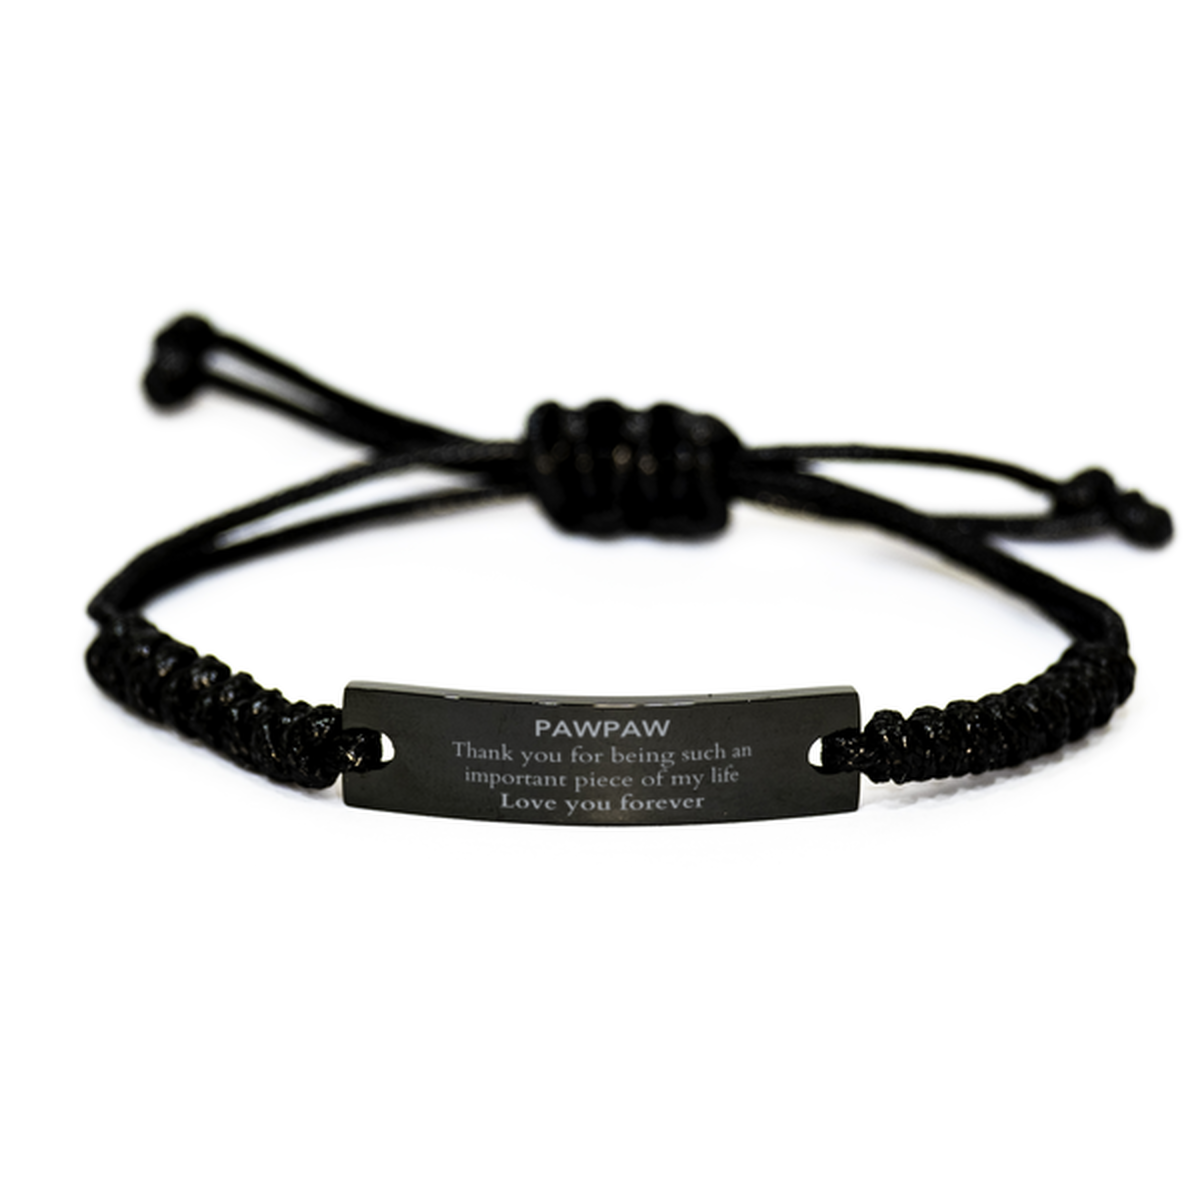 Appropriate Pawpaw Black Rope Bracelet Epic Birthday Gifts for Pawpaw Thank you for being such an important piece of my life Pawpaw Christmas Mothers Fathers Day